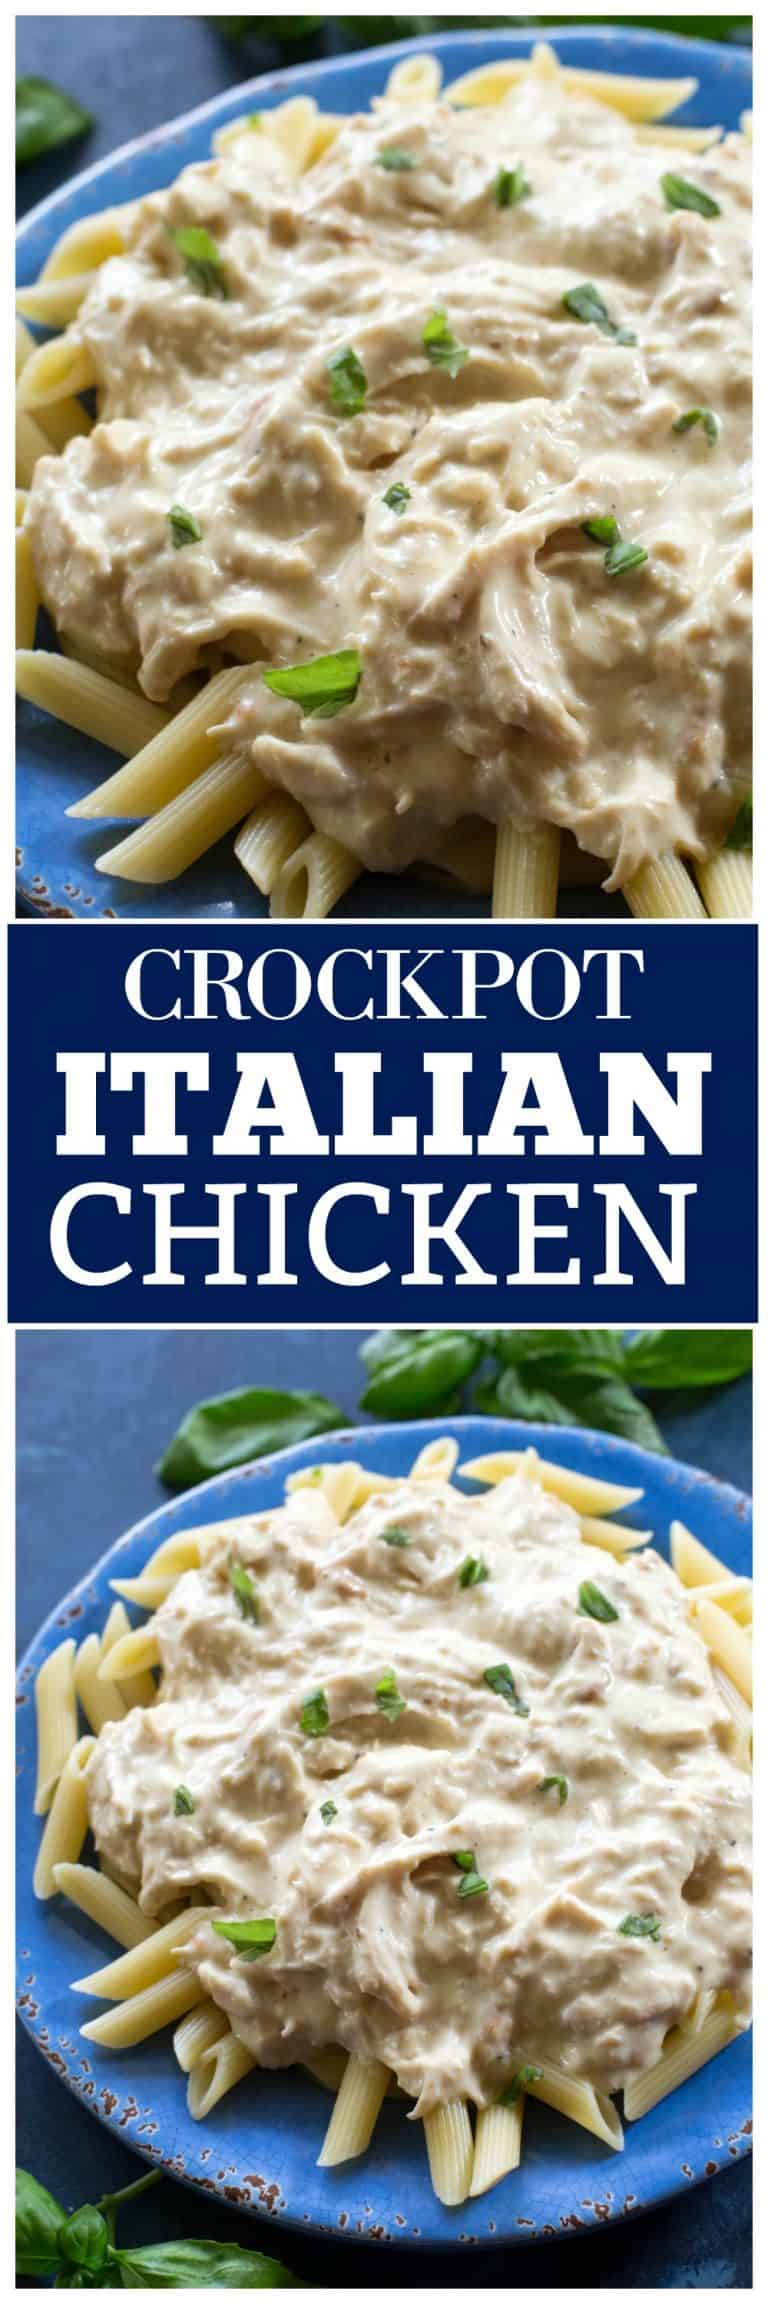 Crockpot Italian Chicken - The Girl Who Ate Everything